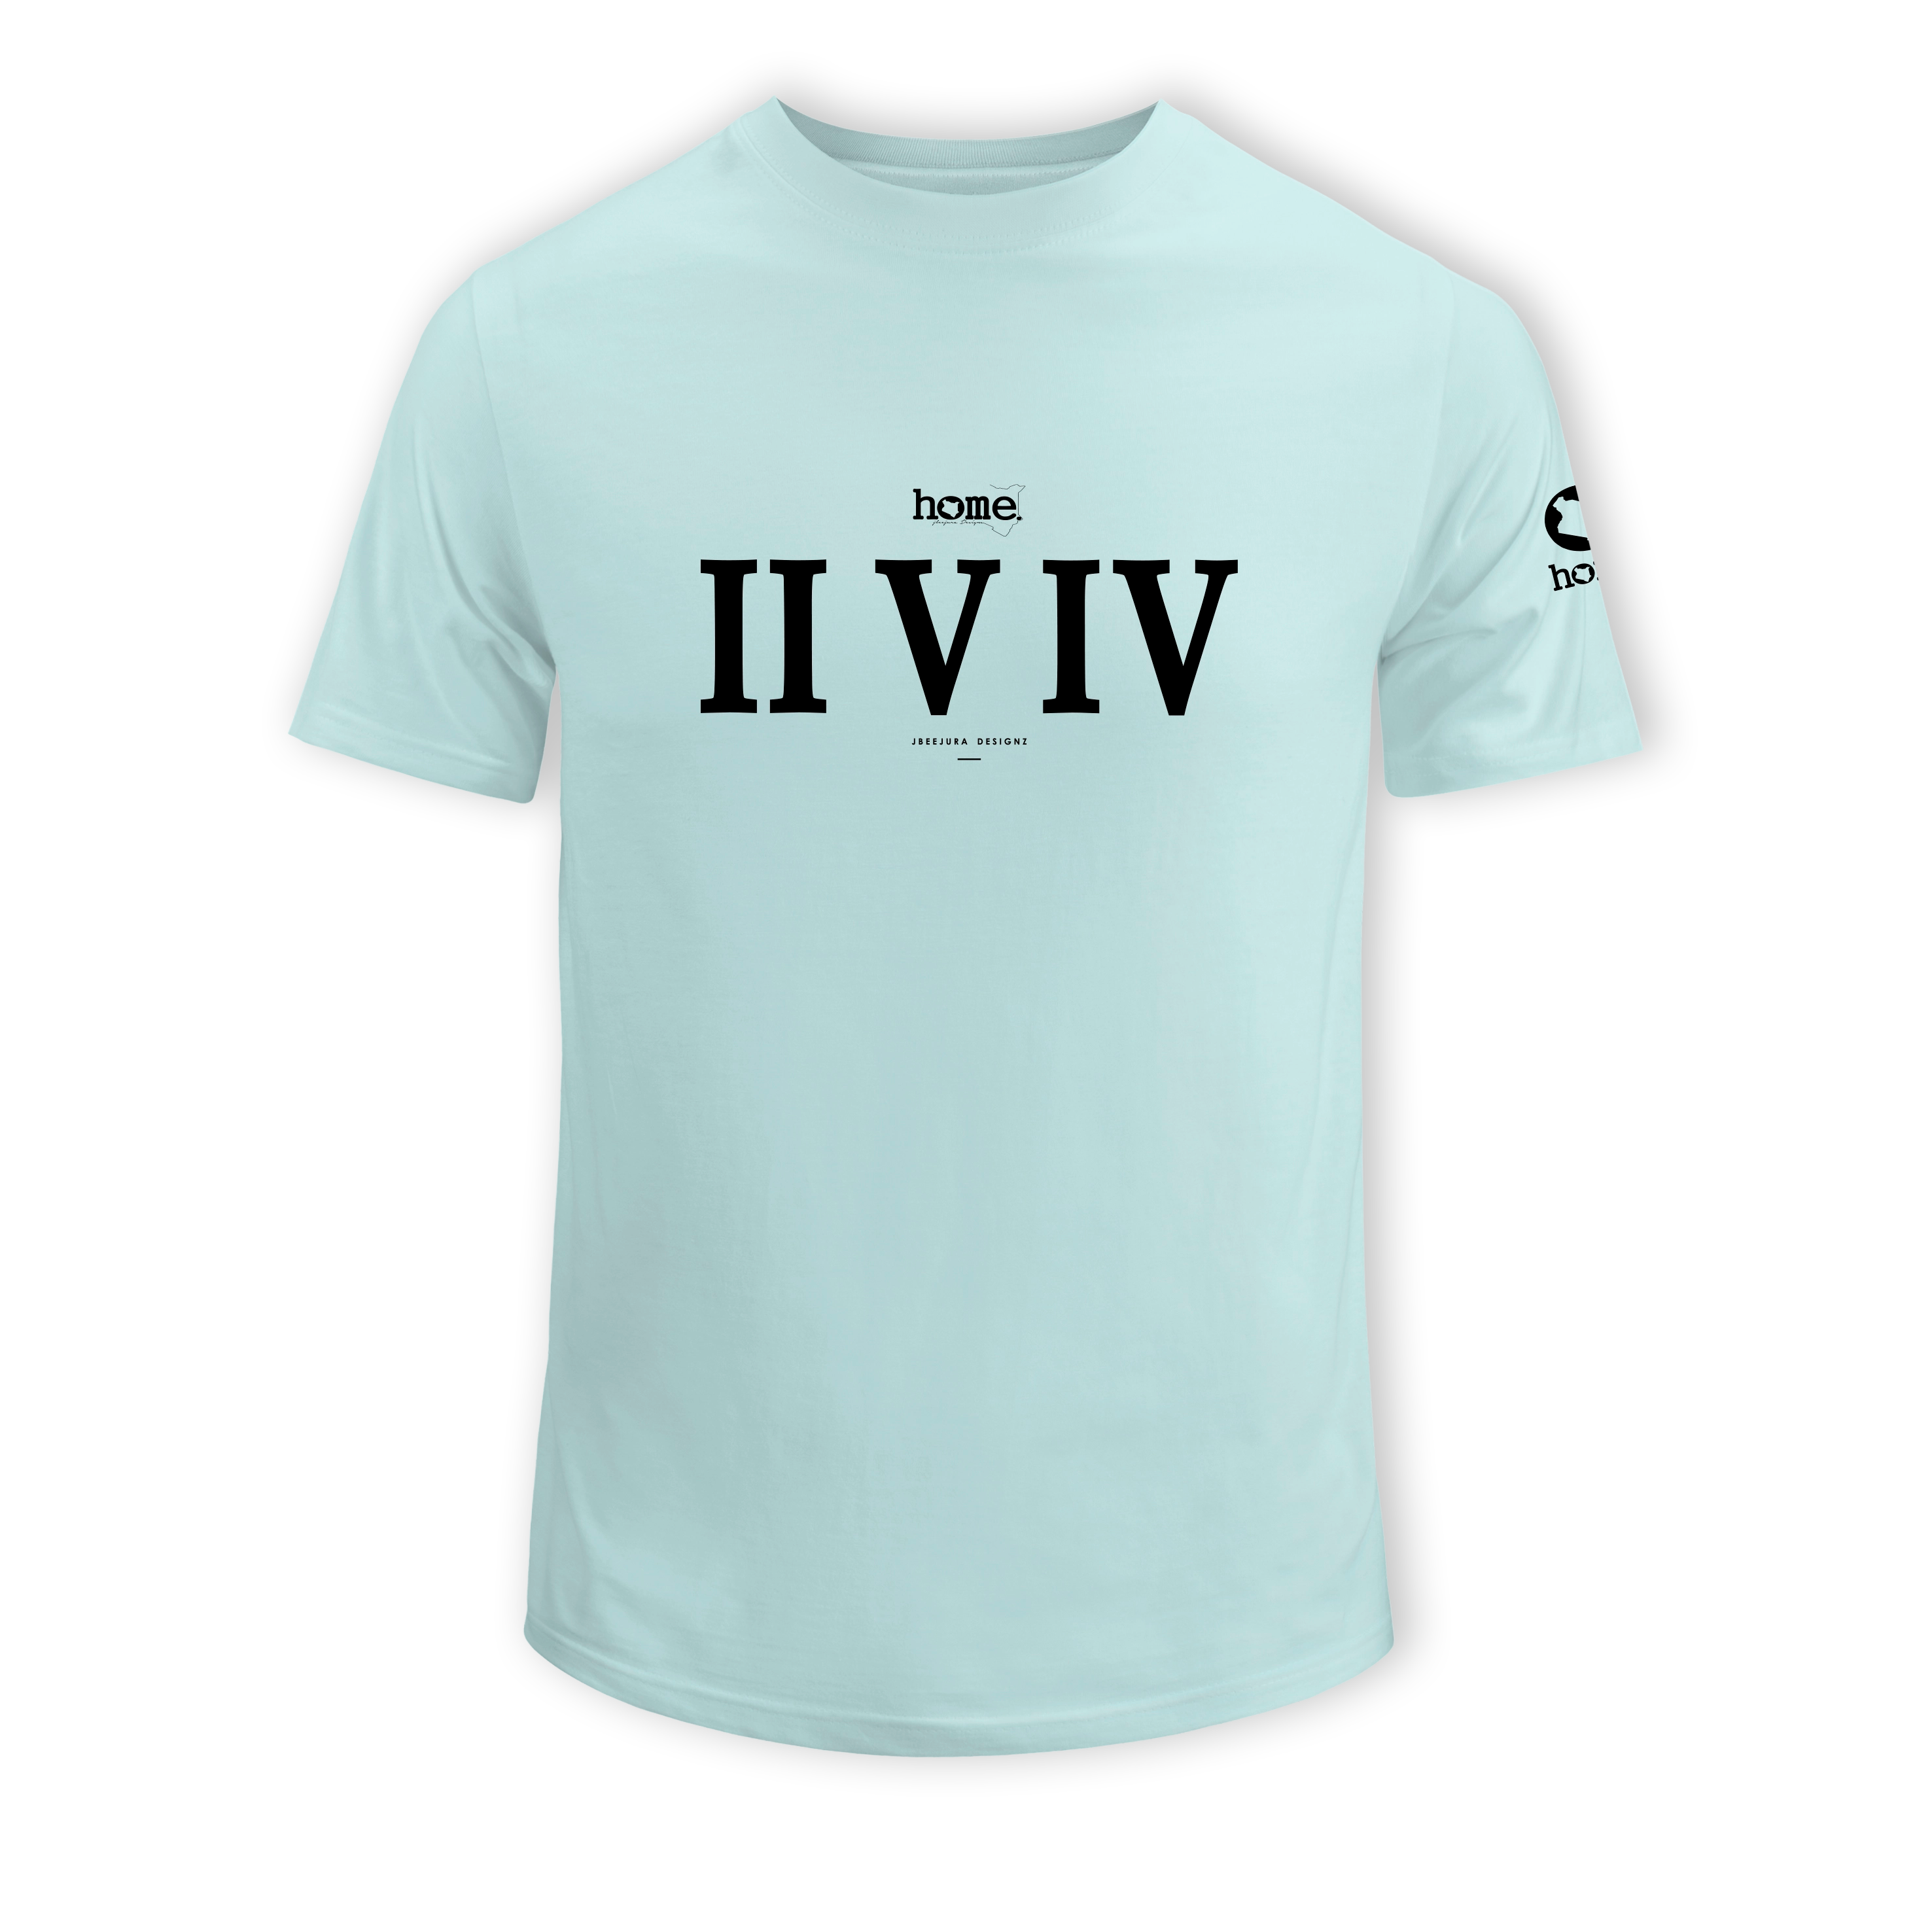 home_254 KIDS SHORT-SLEEVED MISTY BLUE T-SHIRT WITH A BLACK ROMAN NUMERALS PRINT – COTTON PLUS FABRIC